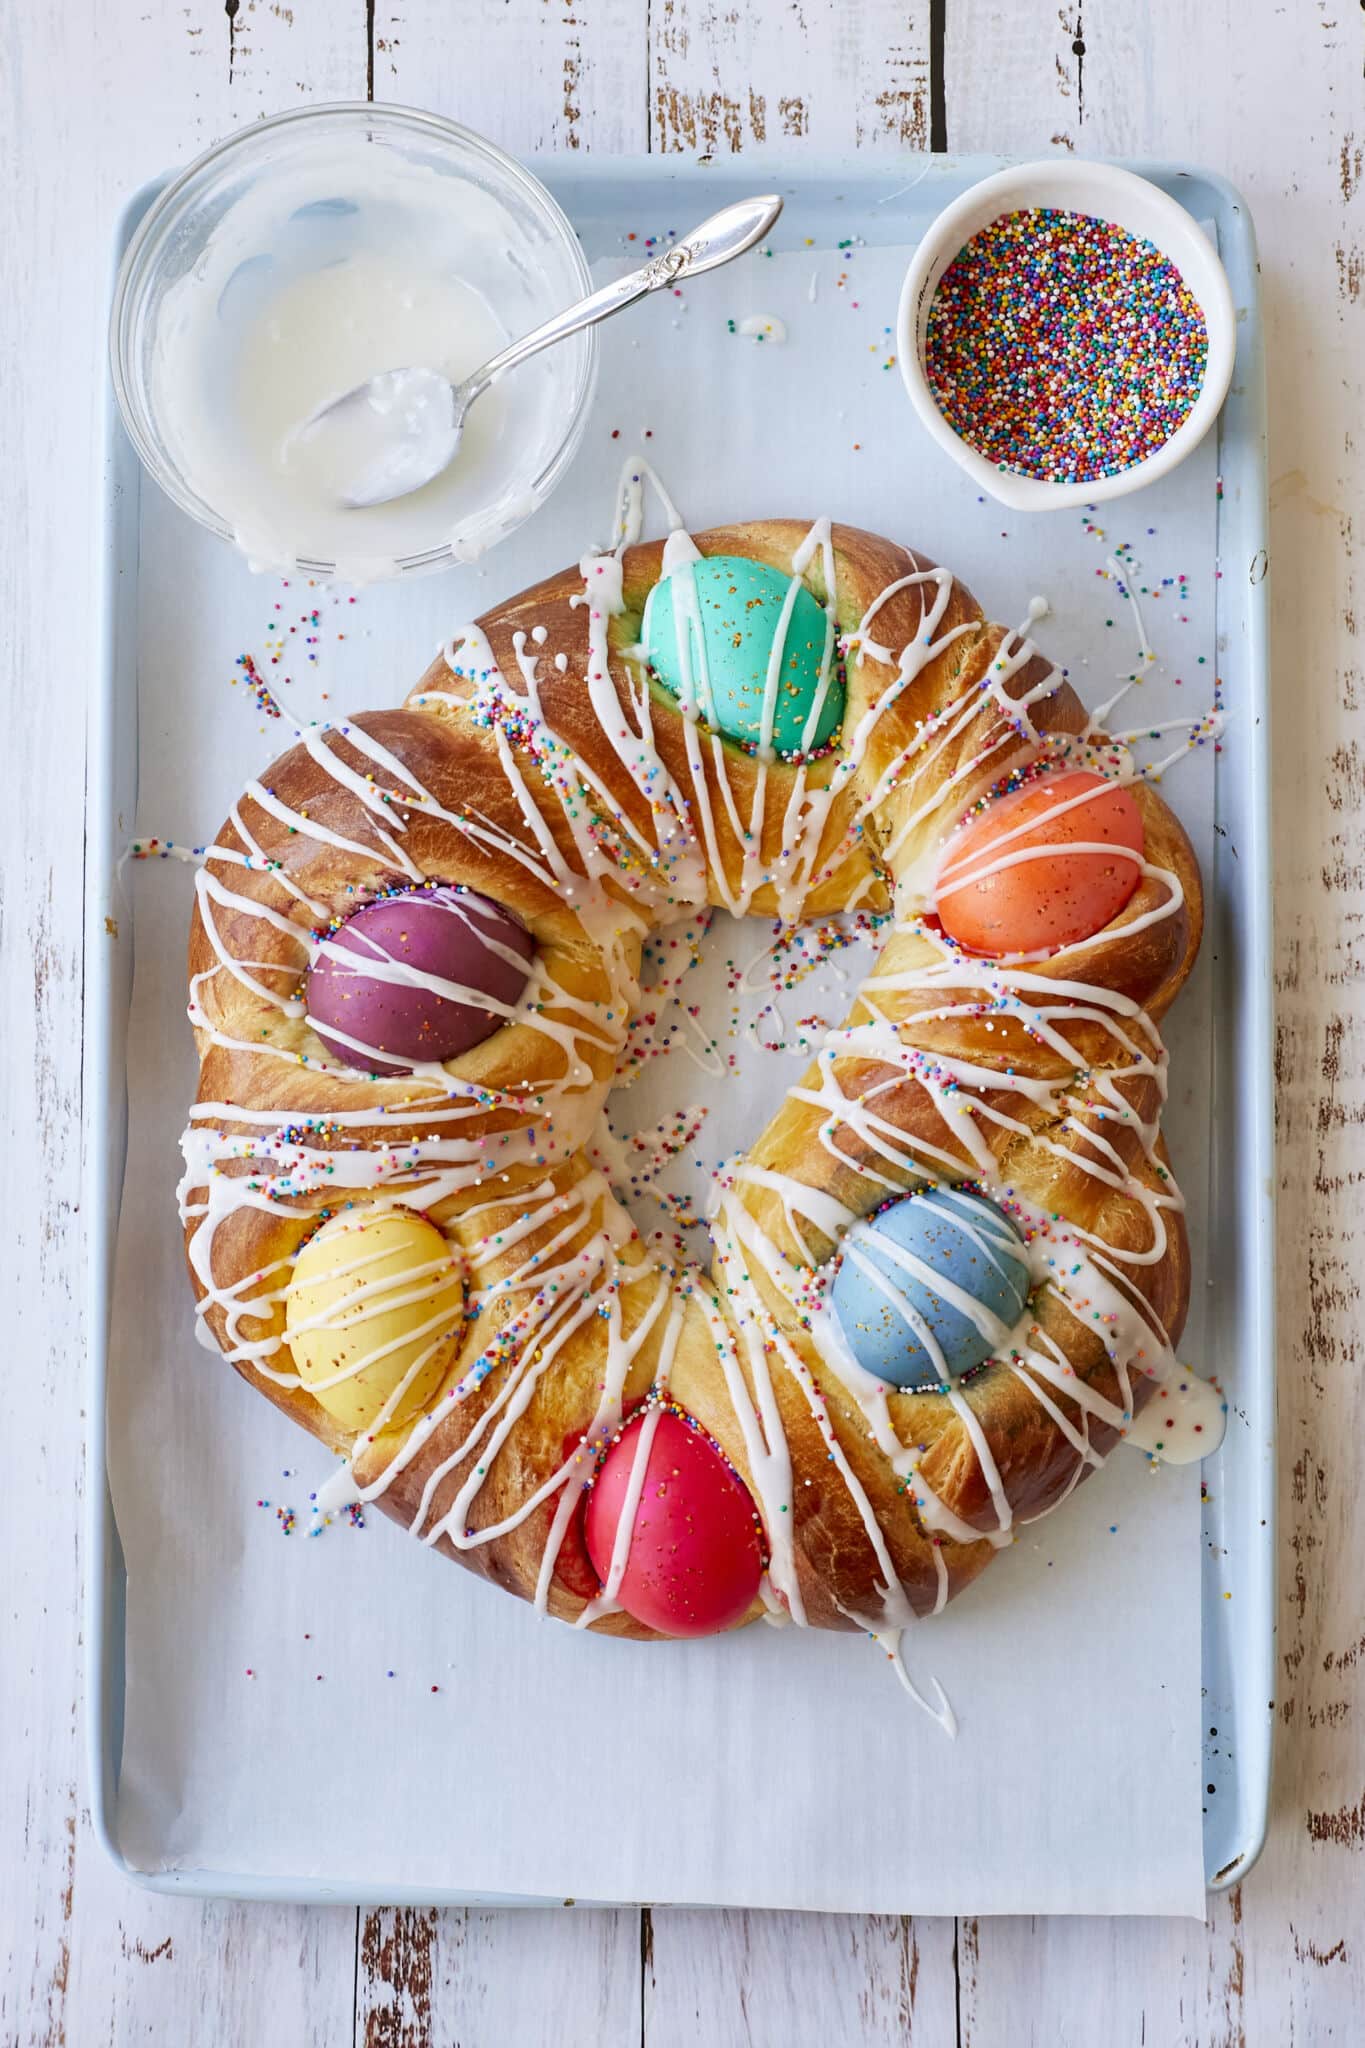 Traditional Italian Easter Bread (Pane di Pasqua) is golden, light and fluffy. It's decorated with colorful Easter eggs, drizzled with icing and topped with colorful sprinkles. 